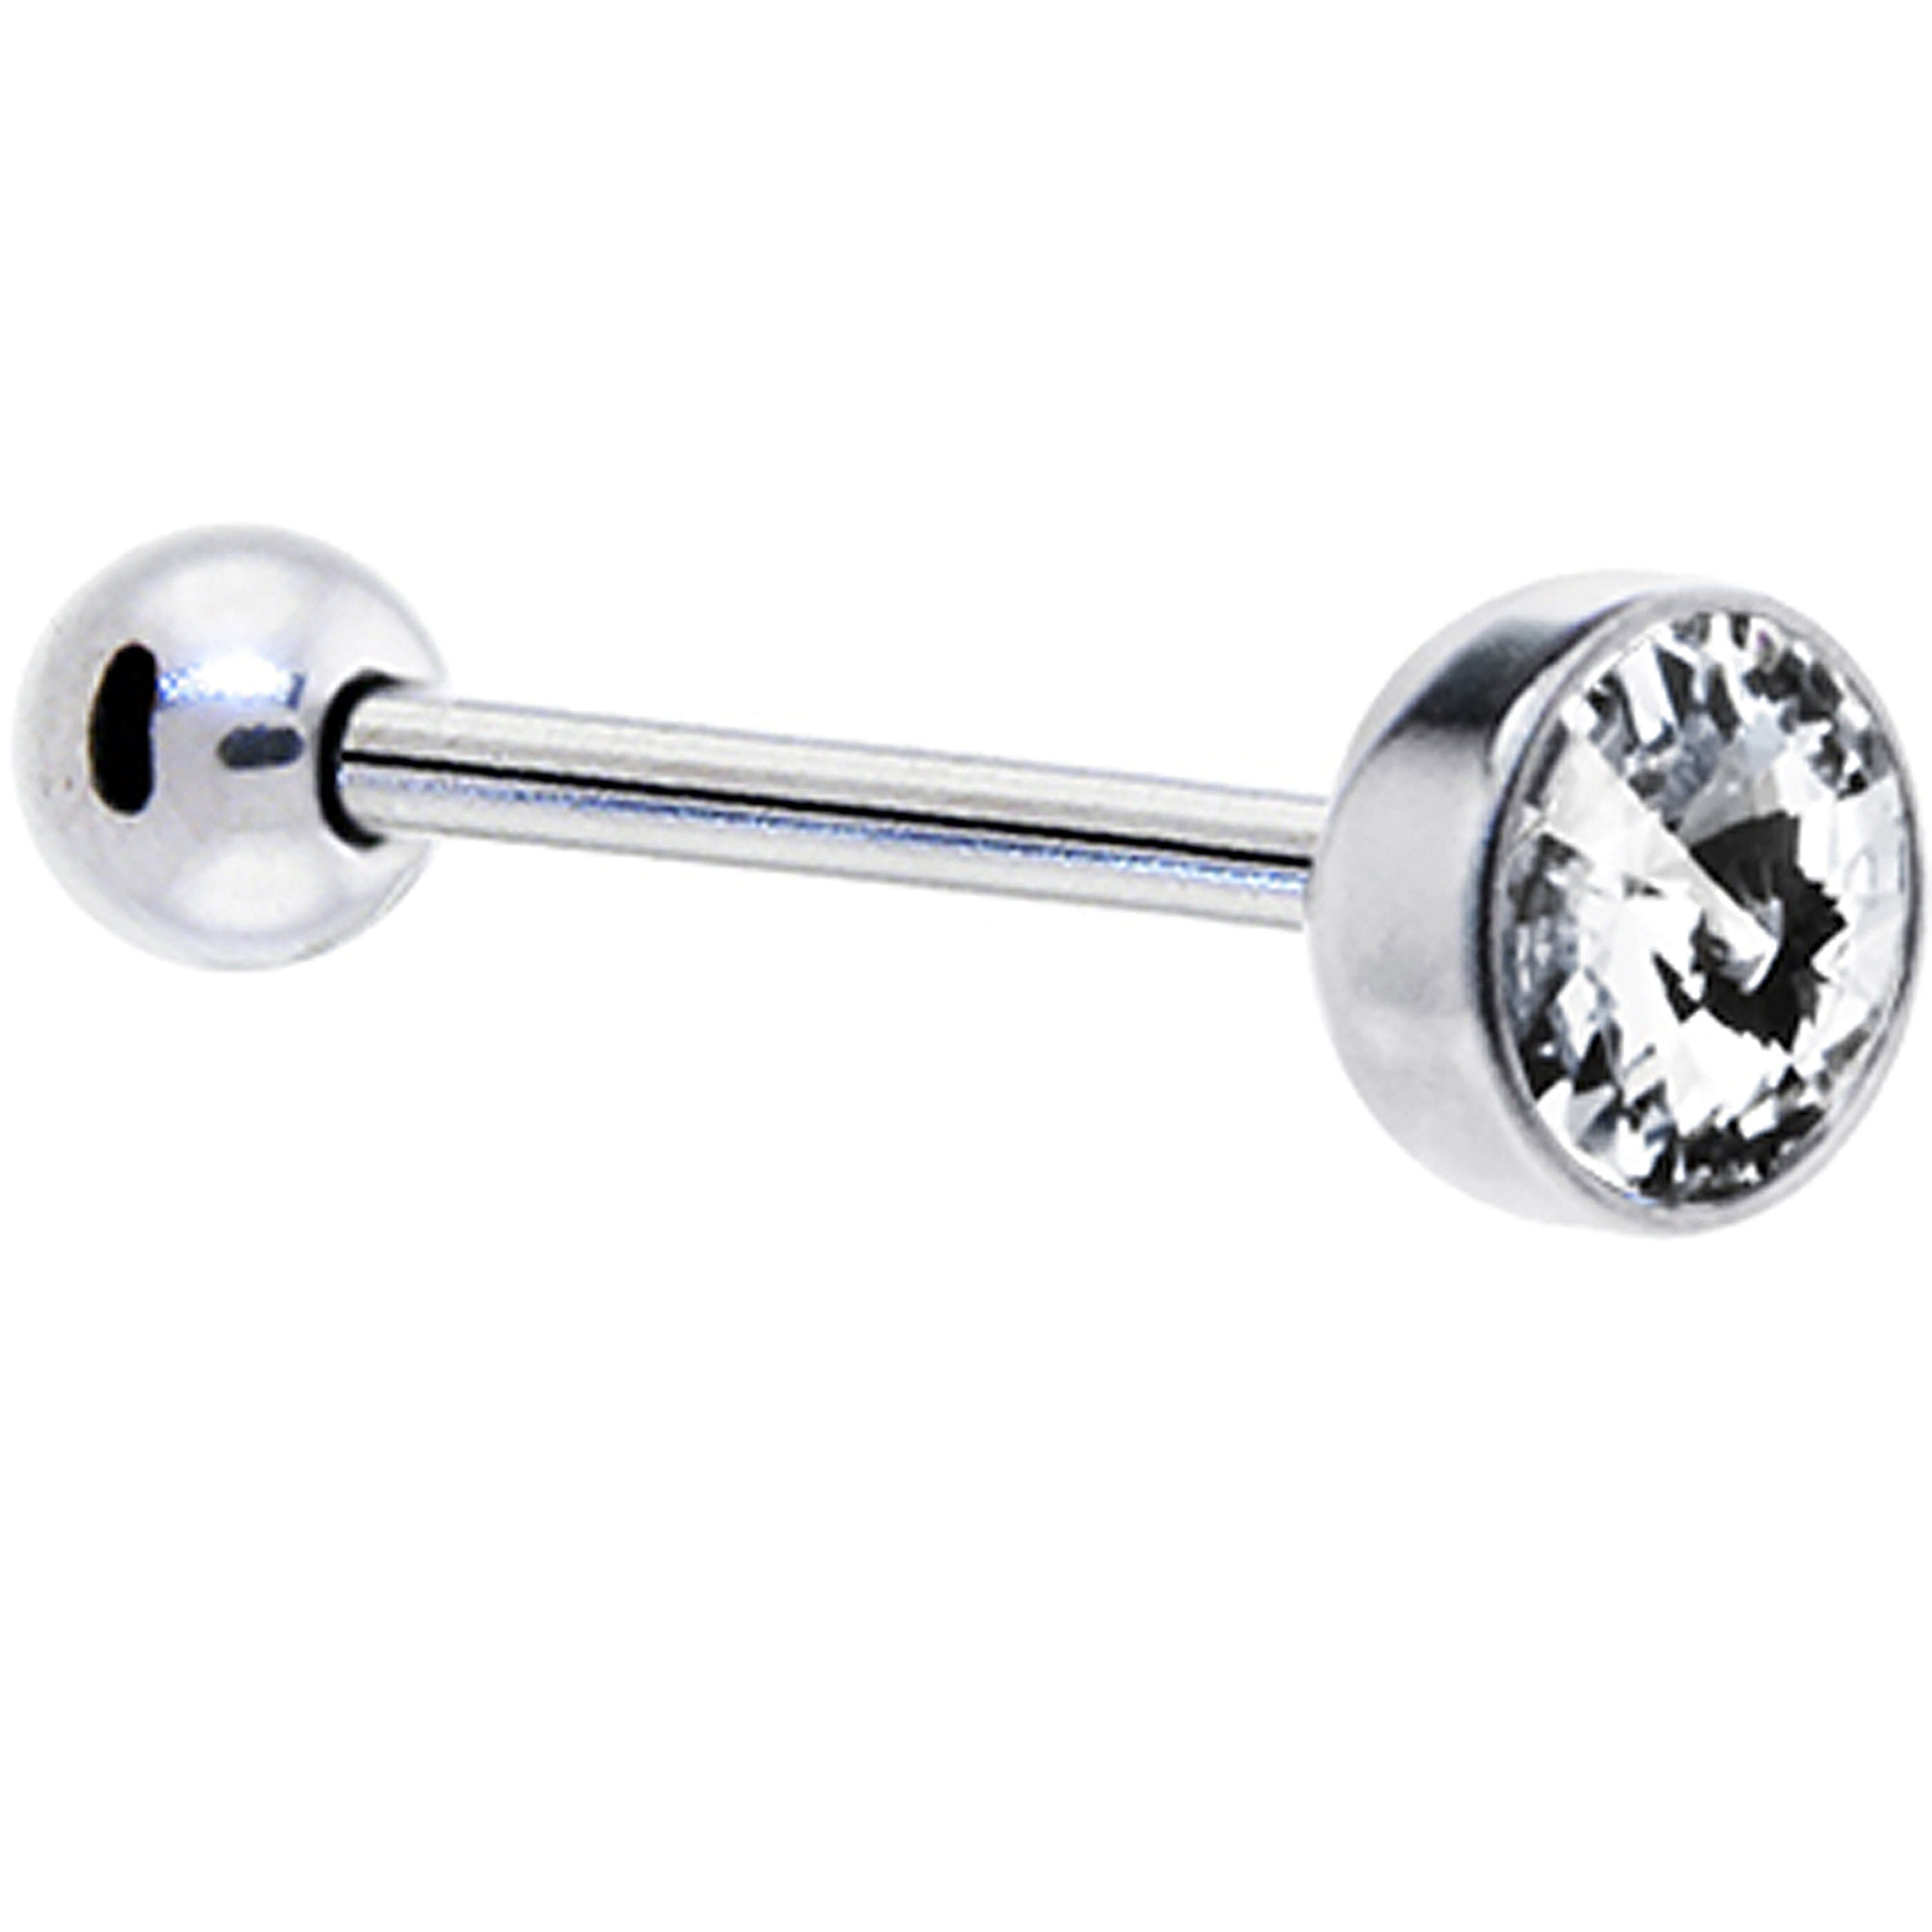 Body Candy 7mm Clear Barbell Tongue Ring Created with Swarovski